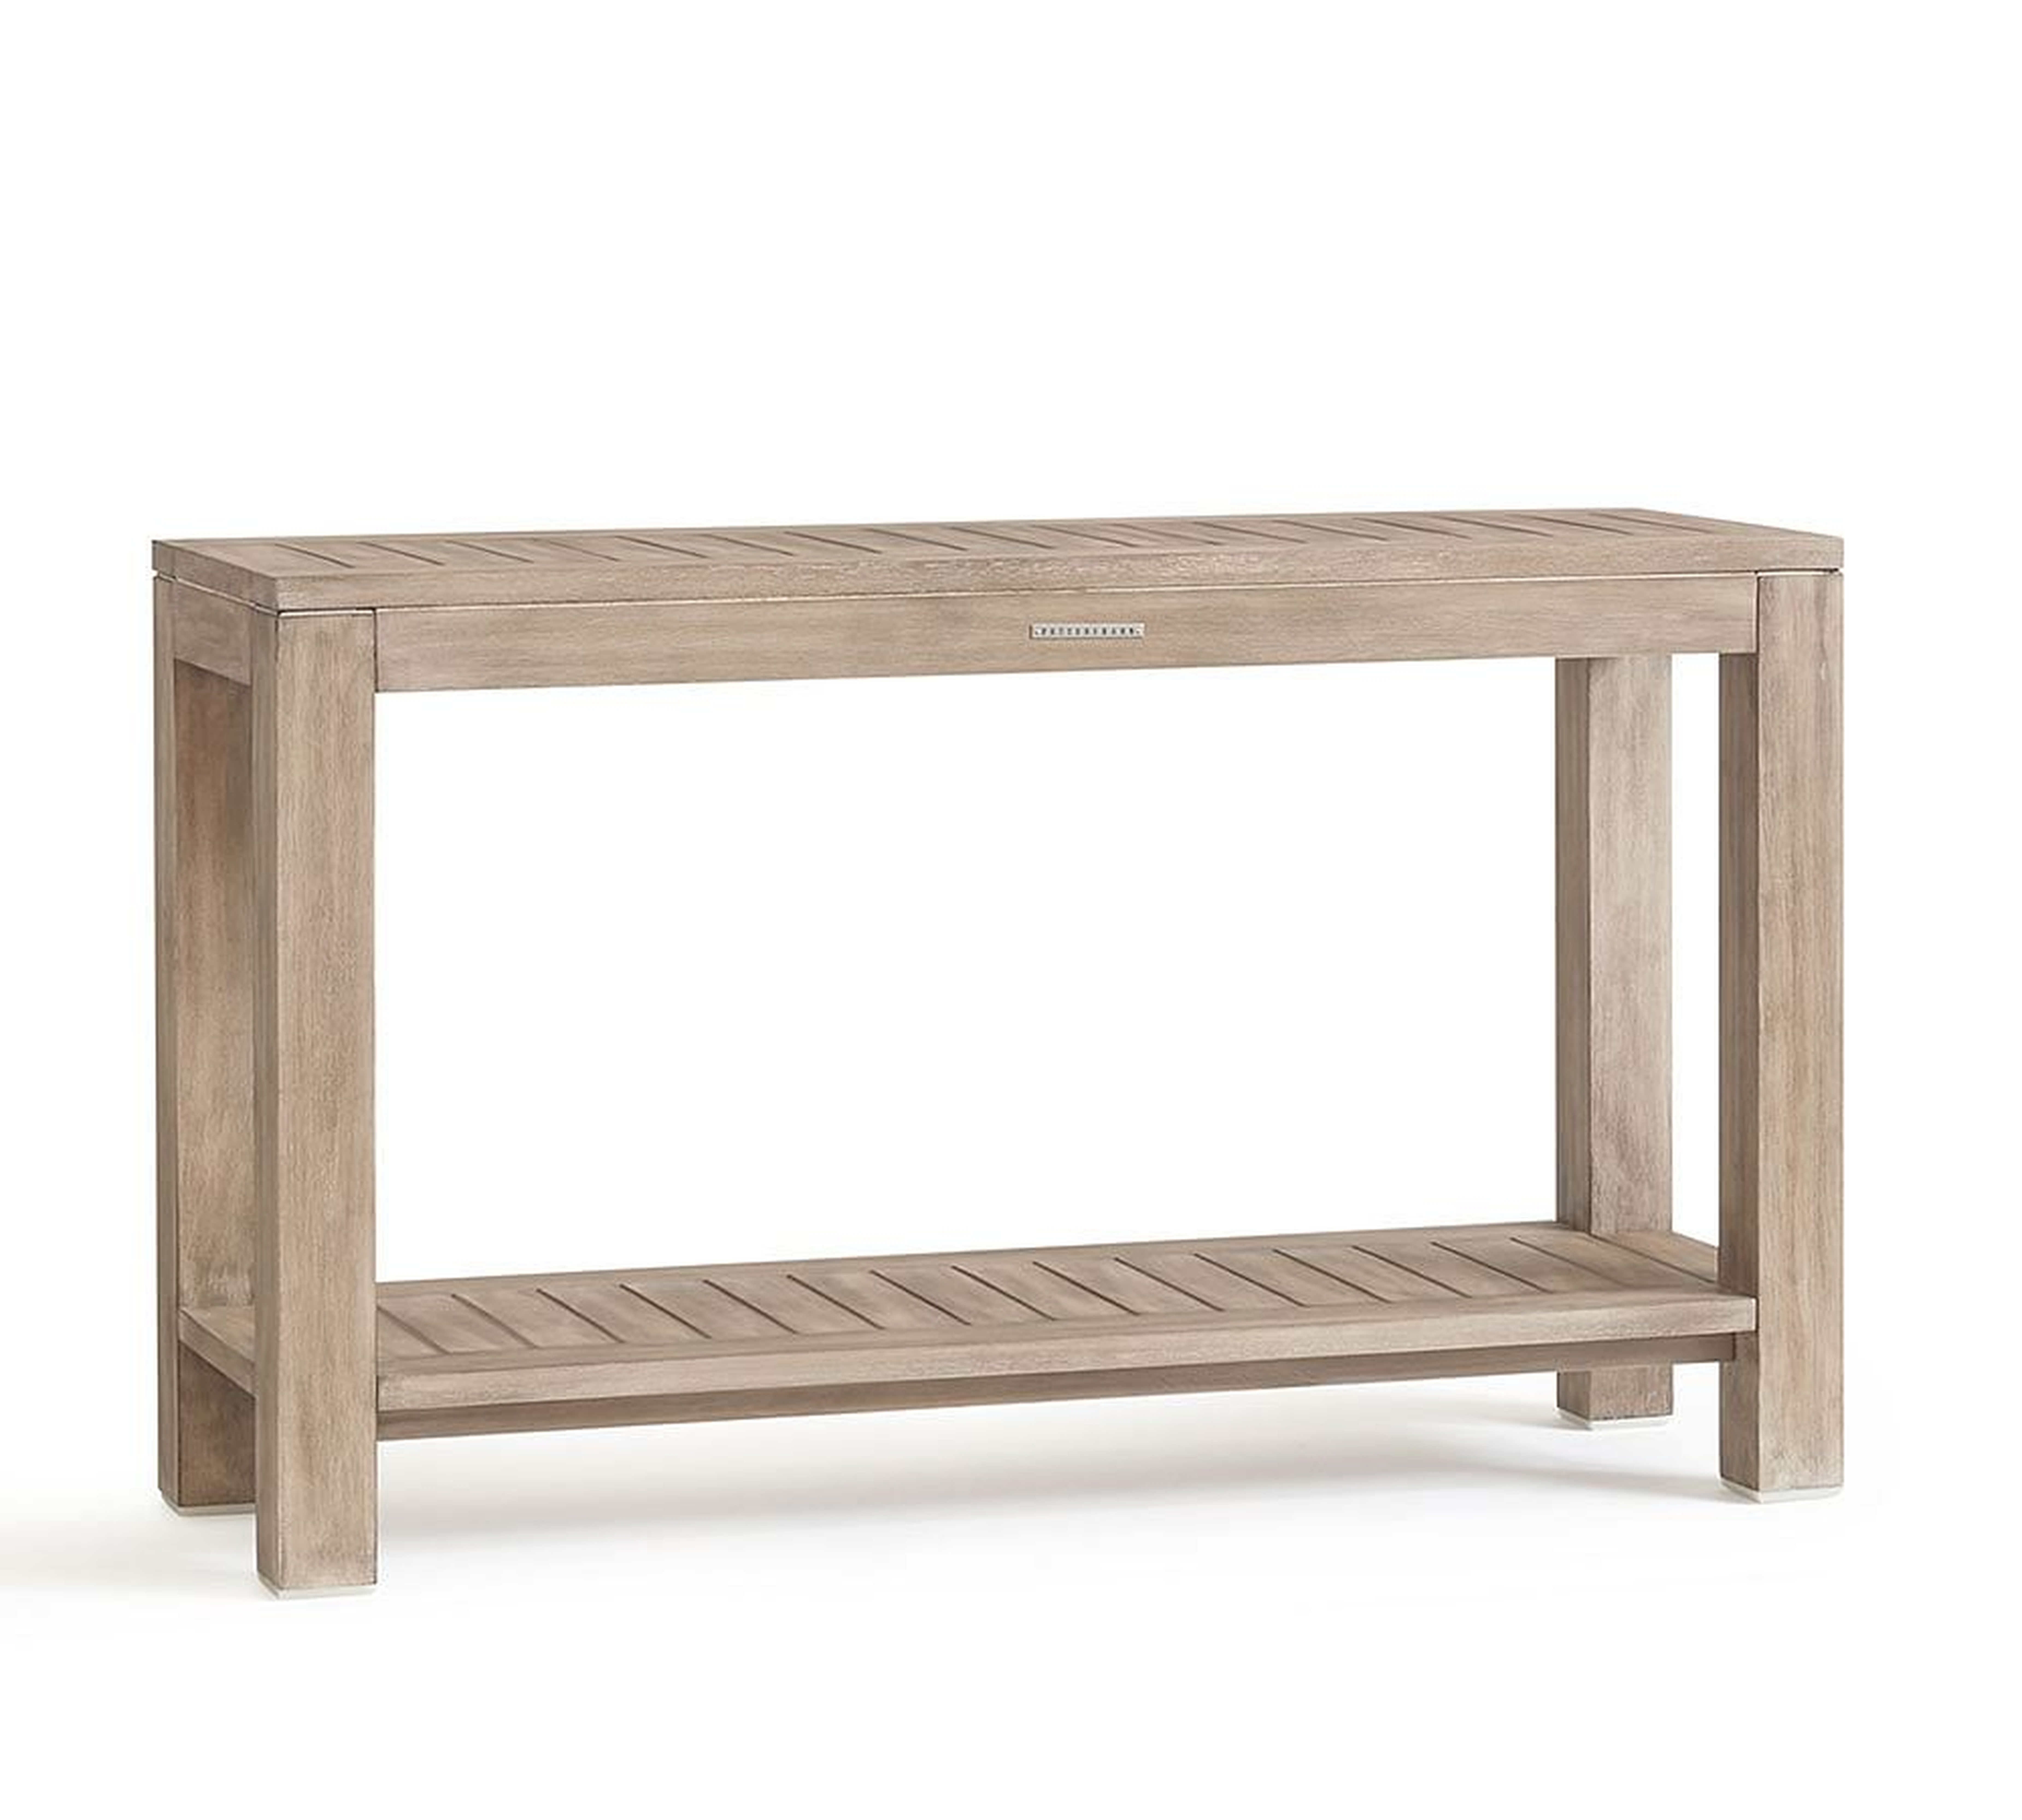 Indio Outdoor Console Table, Weathered Gray - Pottery Barn